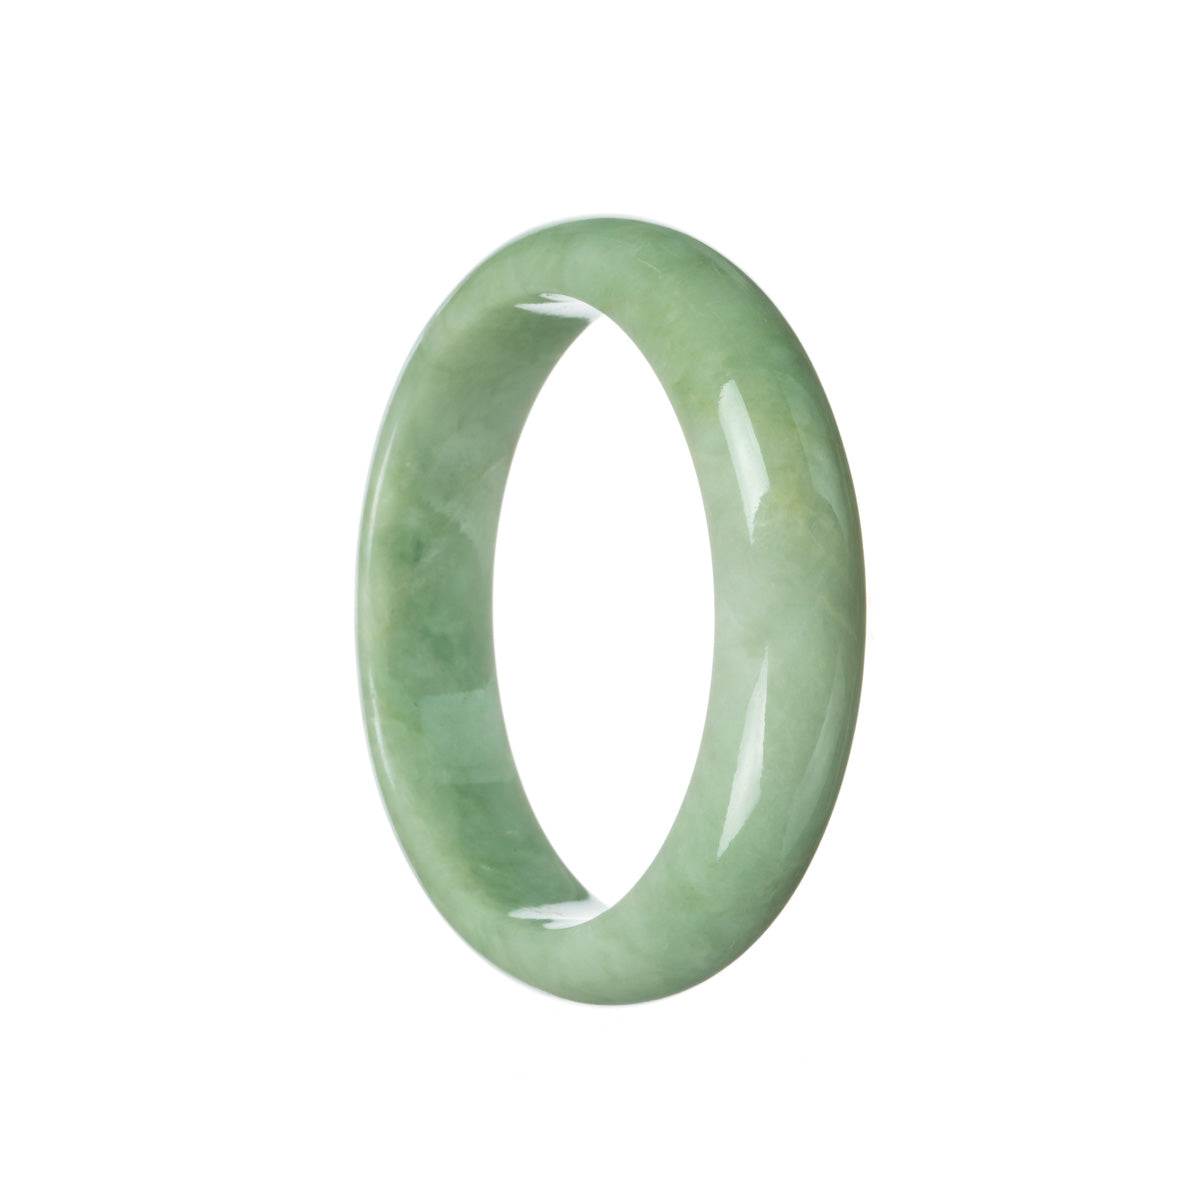 A close-up photo of a beautiful green jade bangle with a half moon shape, measuring 59mm in size. The bangle is made of genuine grade A green jade and is branded as MAYS™.